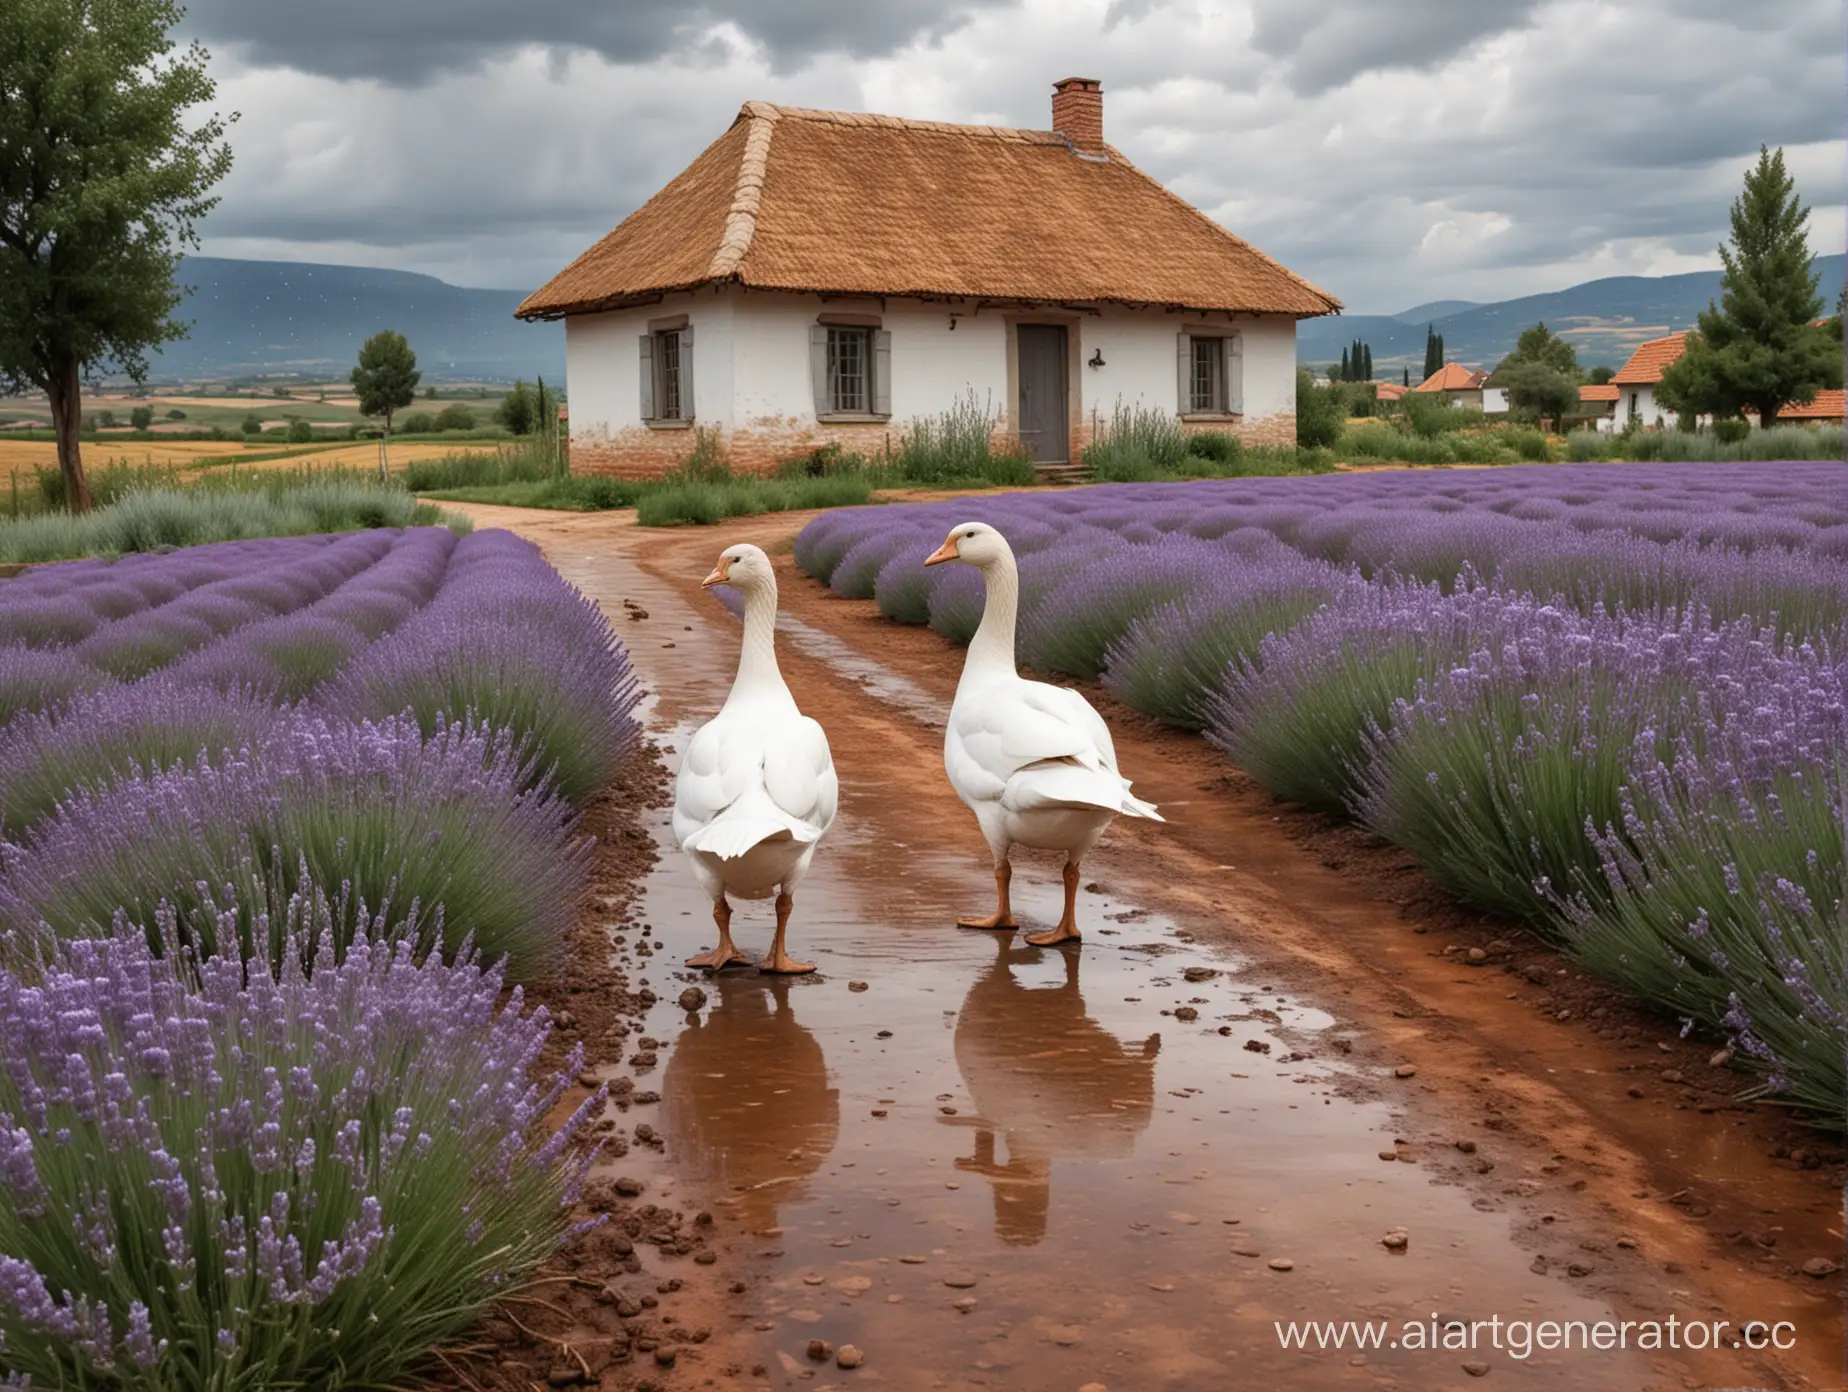 White-Geese-Walking-Through-Lavender-Field-with-Rural-House-in-Distance